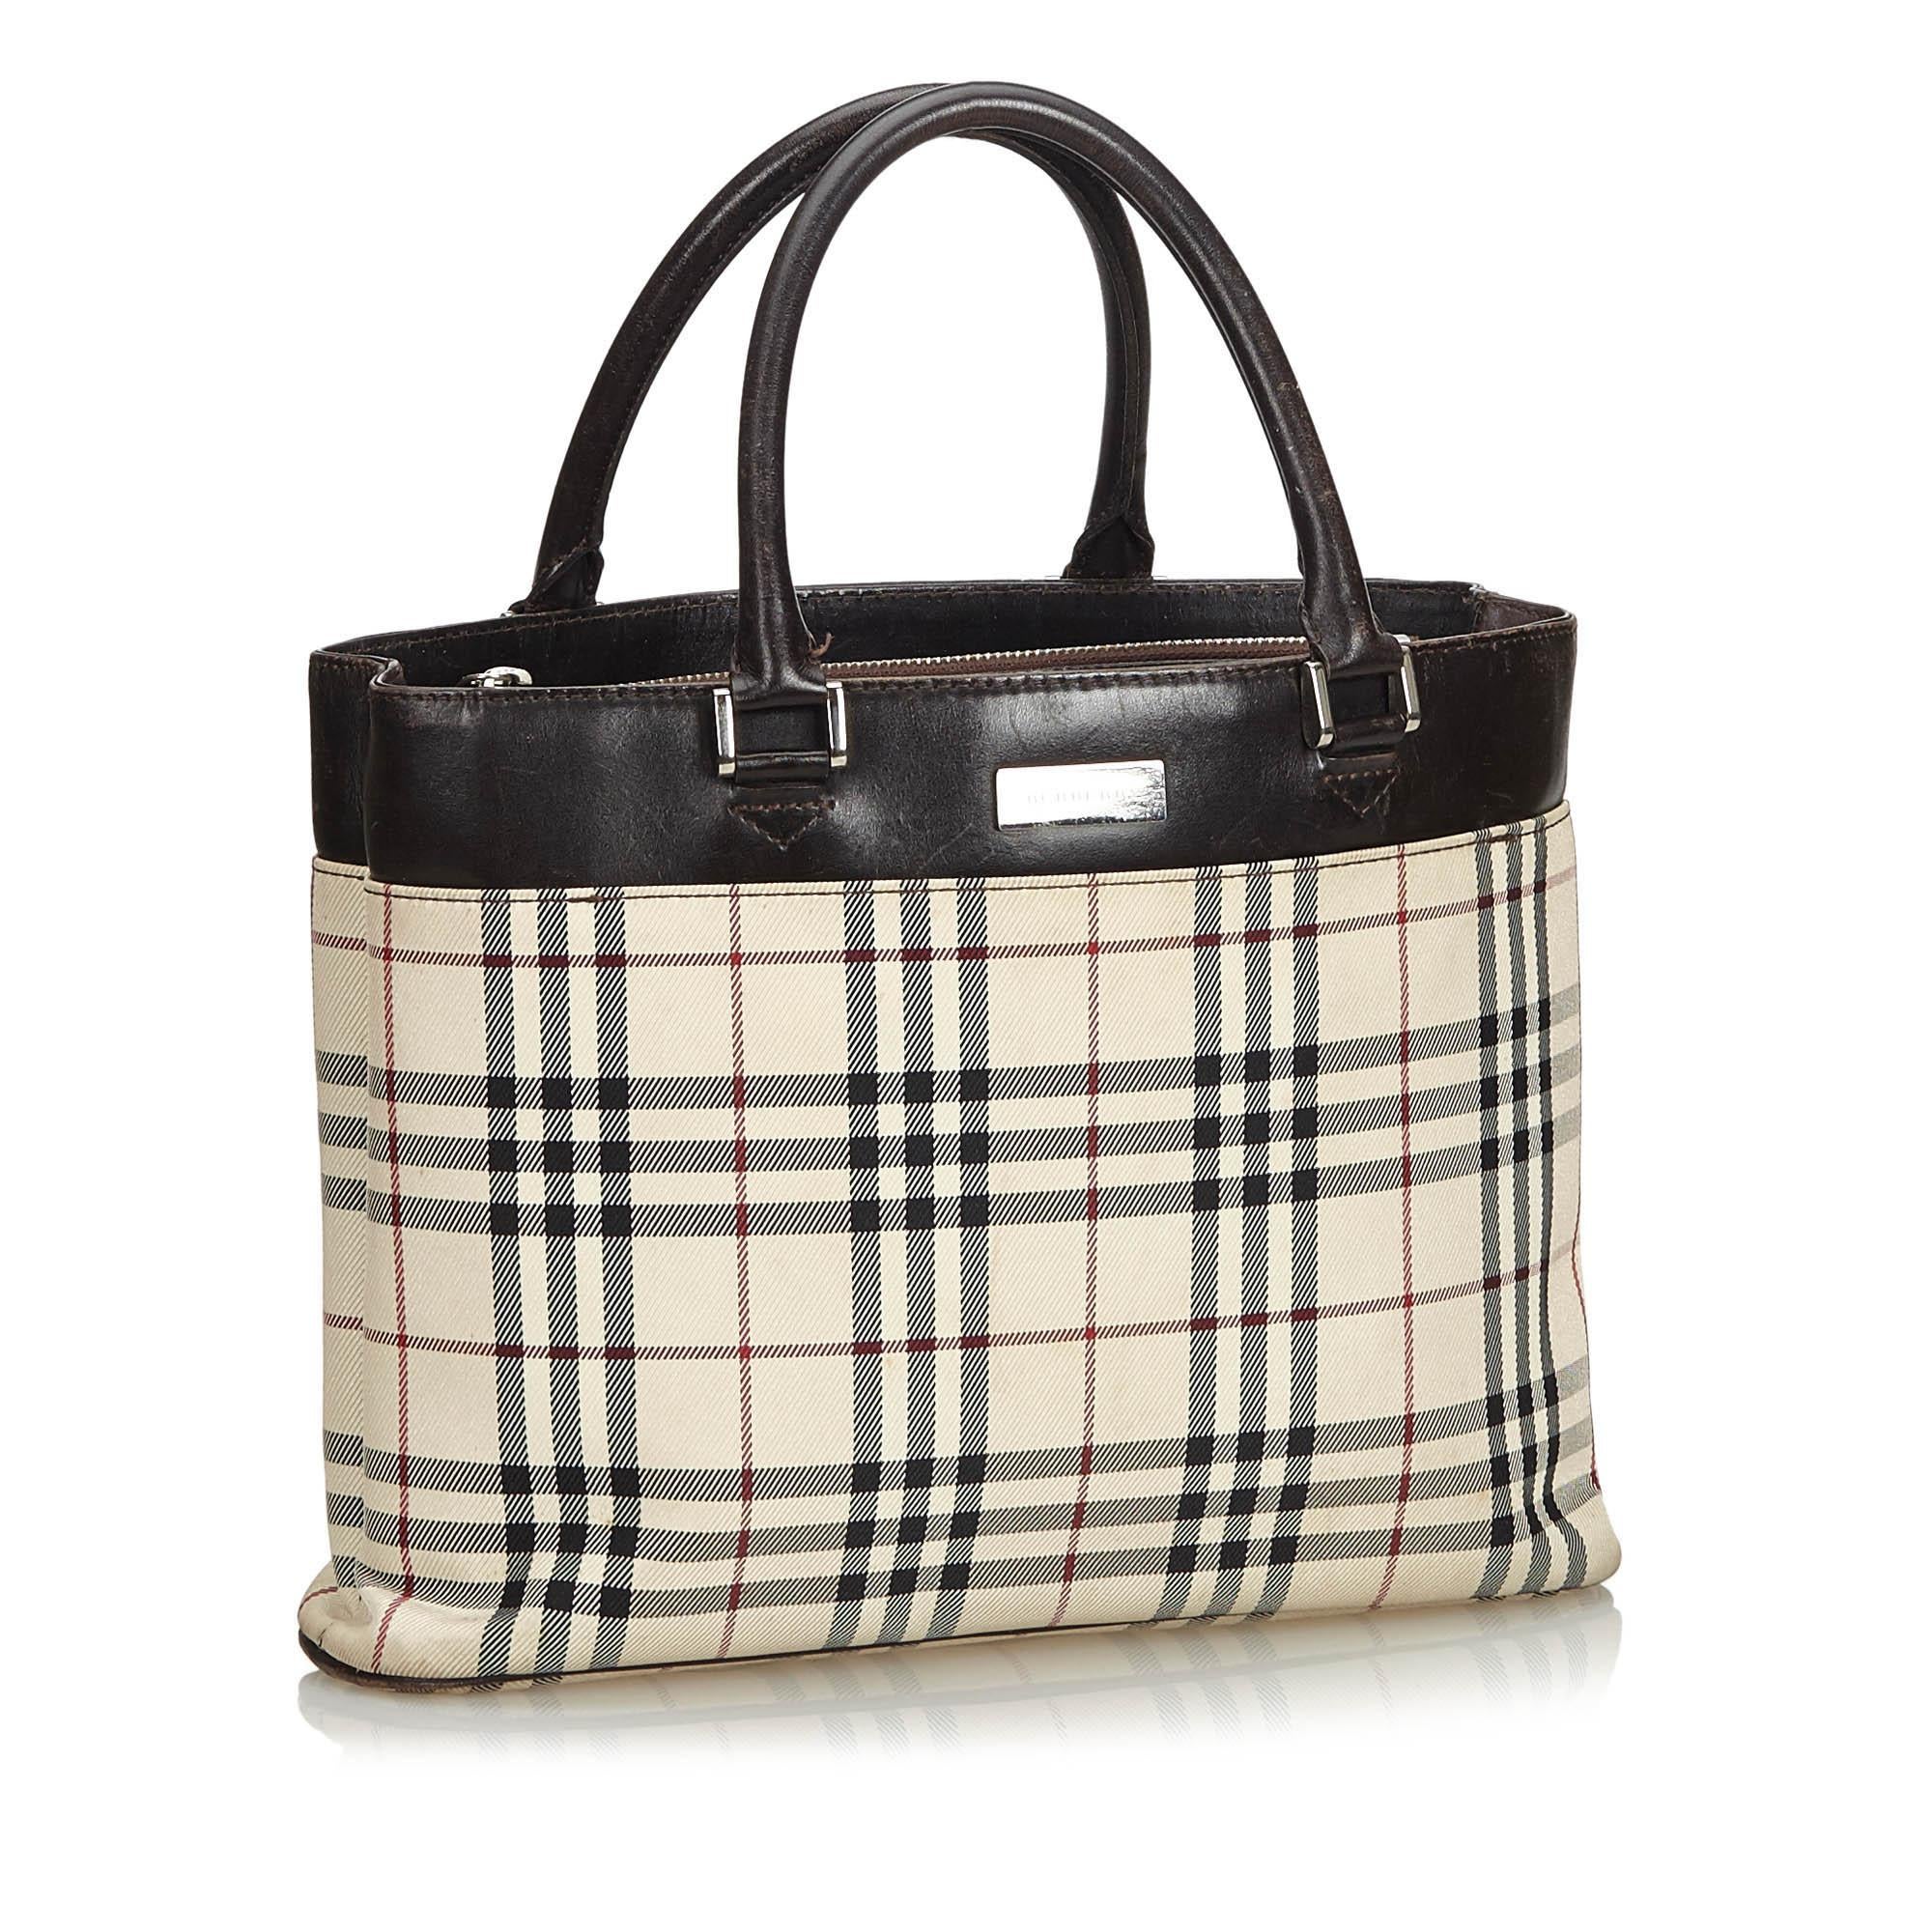 This tote features a coated canvas body with leather trim, rolled leather handles, open top and interior zip compartment and interior slip pocket. It carries as B condition rating.

Inclusions: 
This item does not come with